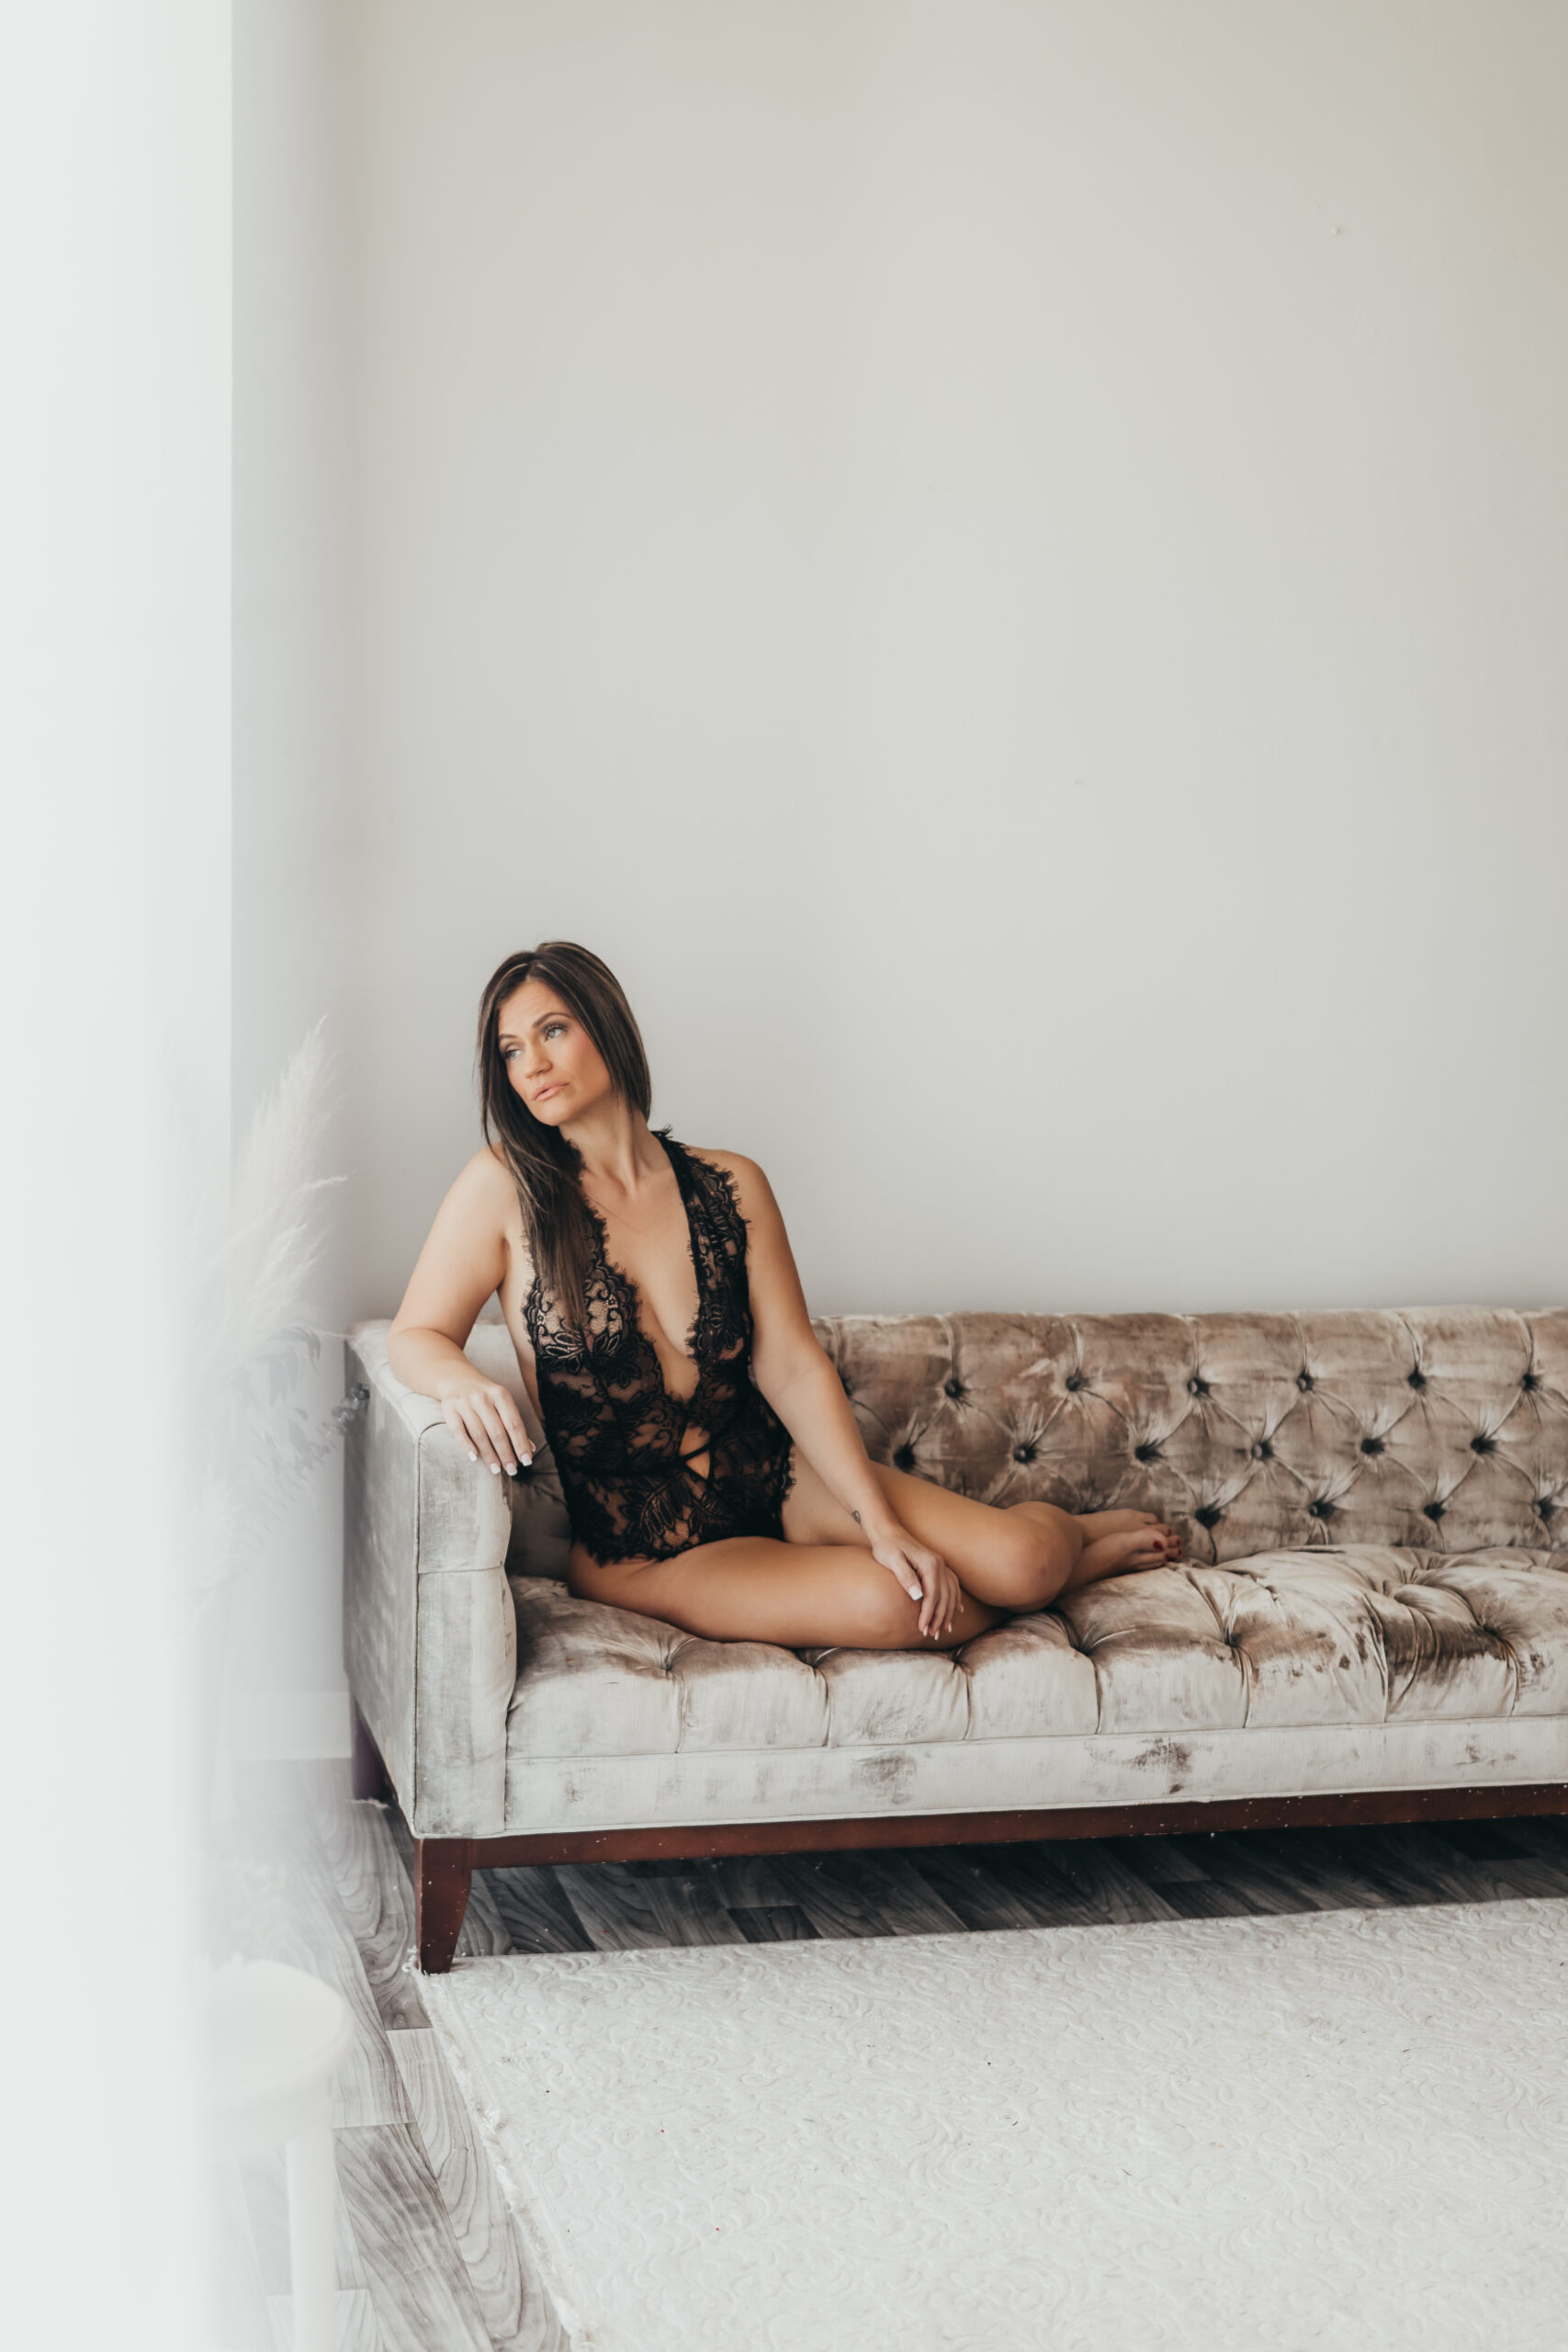 Beautiful woman poses on couch for her houston boudoir photography session with ally's photography